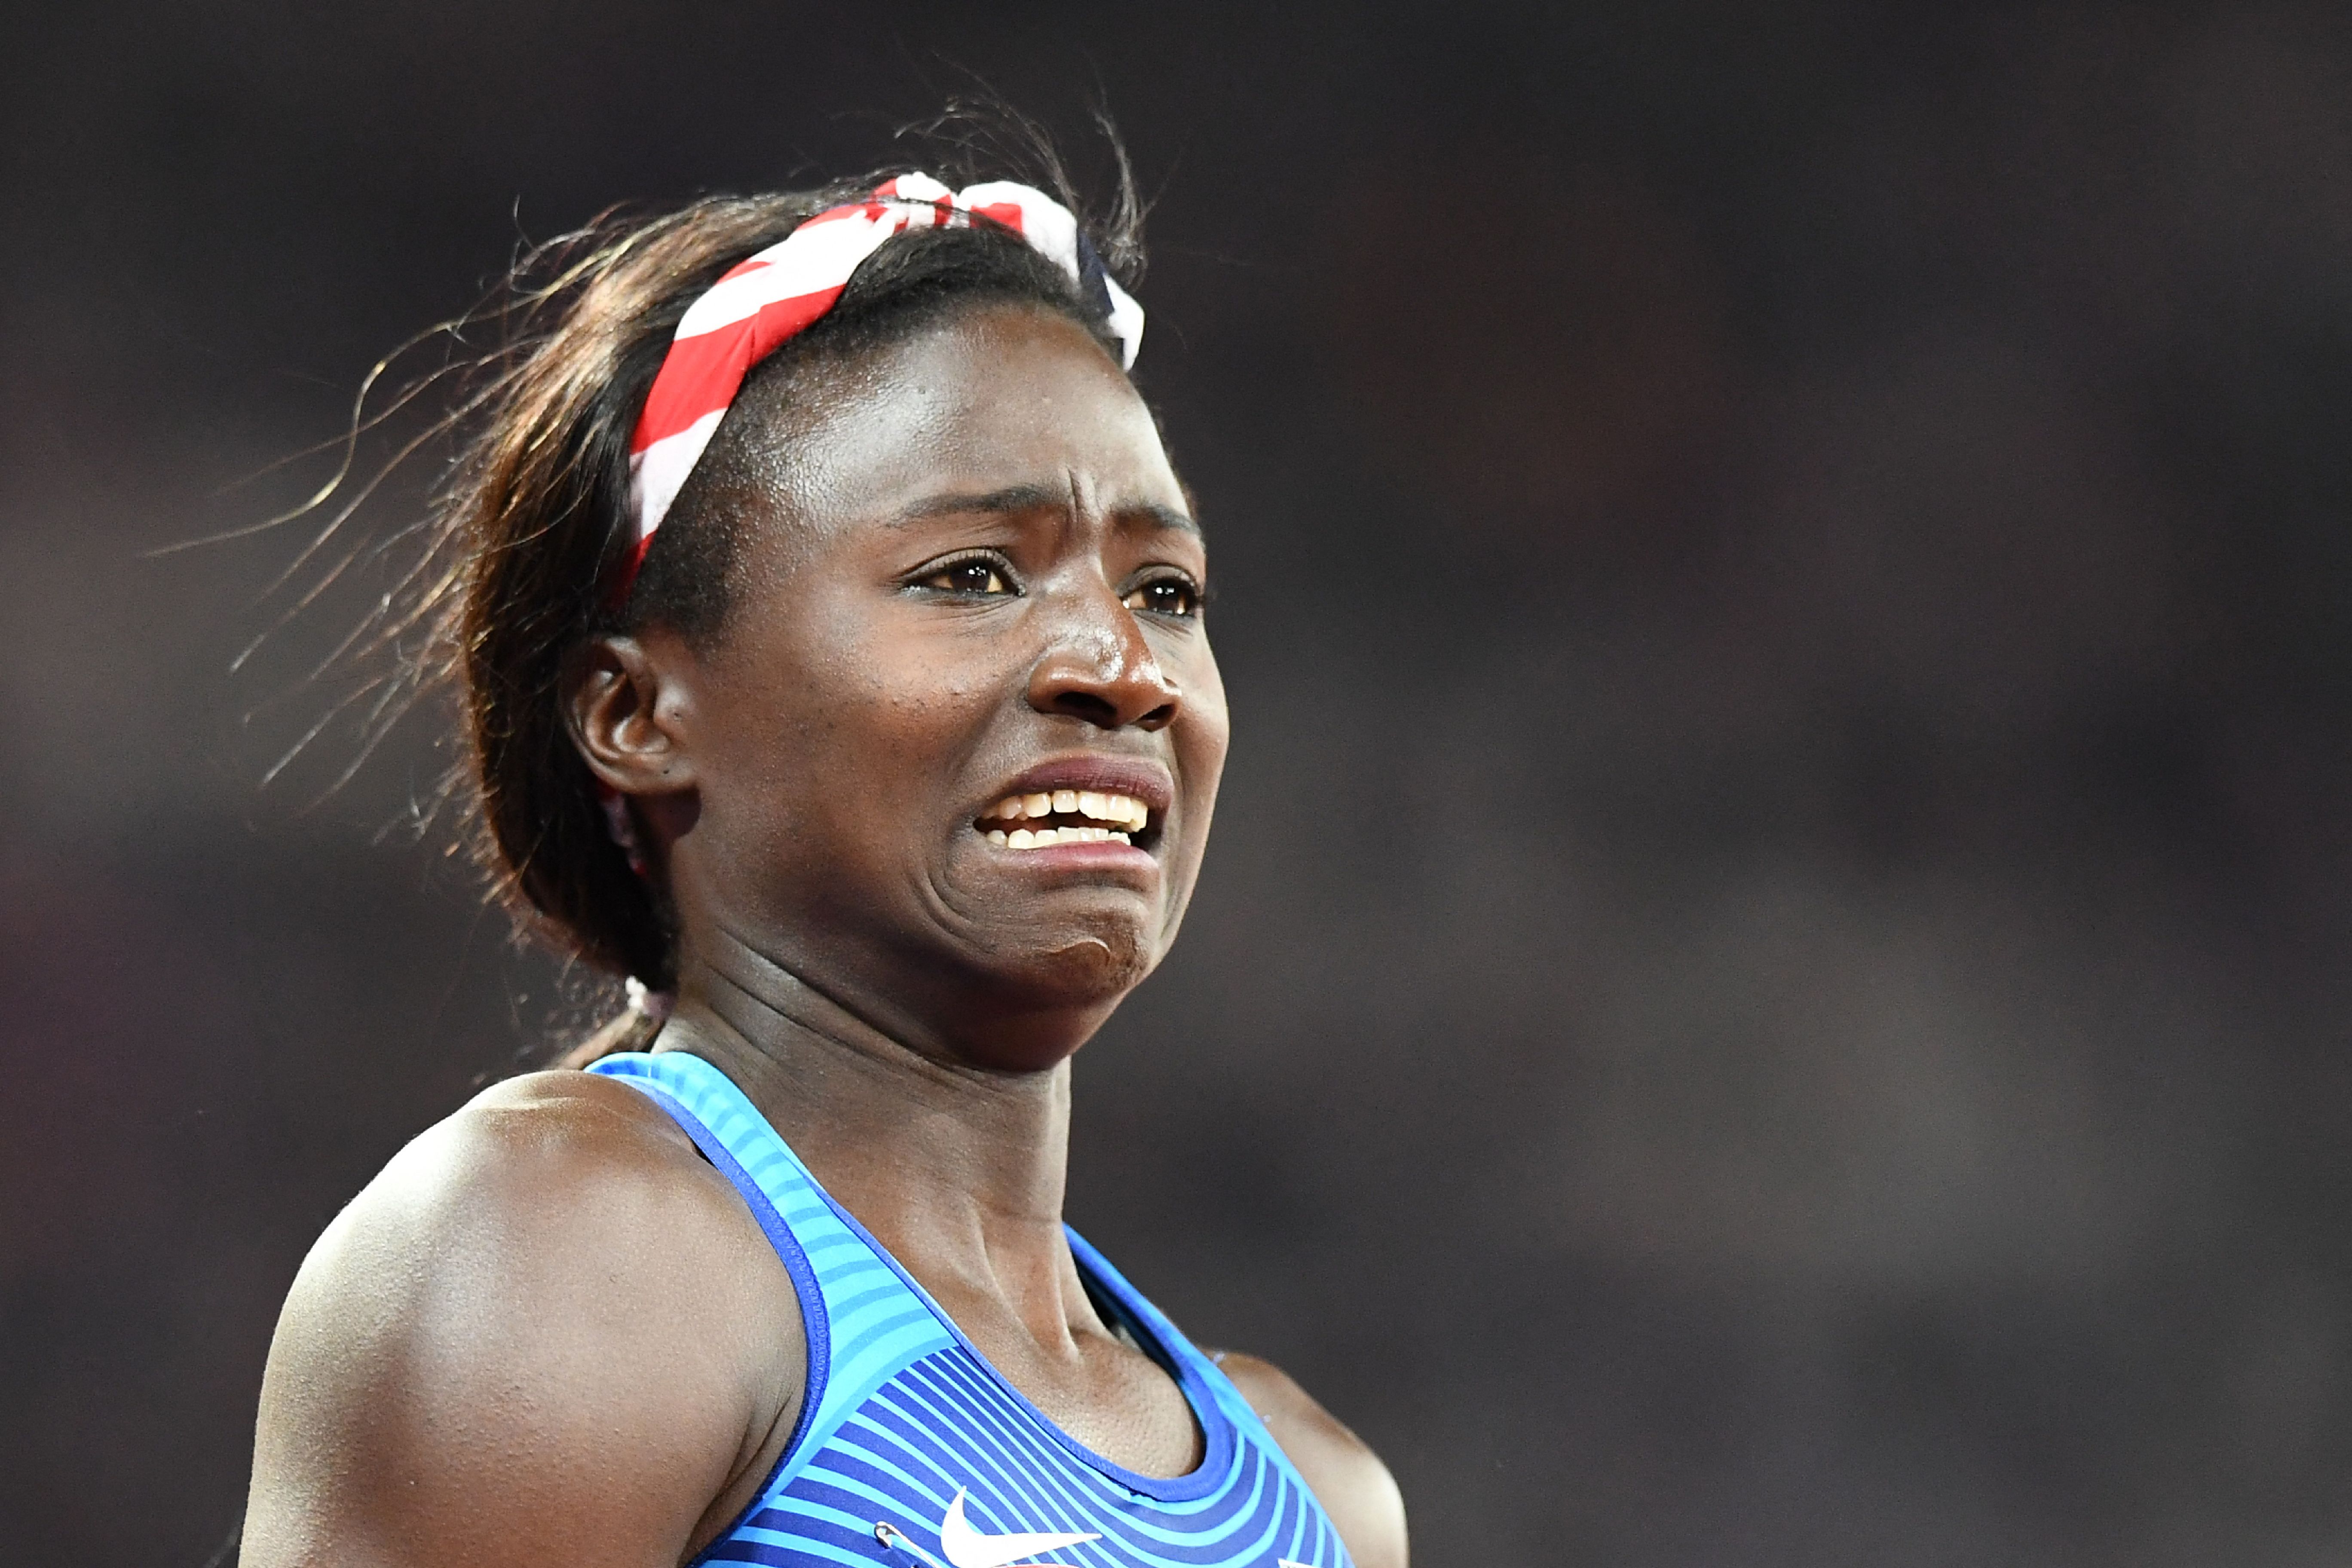 Tori Bowie reacts after winning the final of the women's 100m athletics event at the 2017 IAAF World Championships at the London Stadium in London on August 6, 2017. | Source: Getty Imagesa